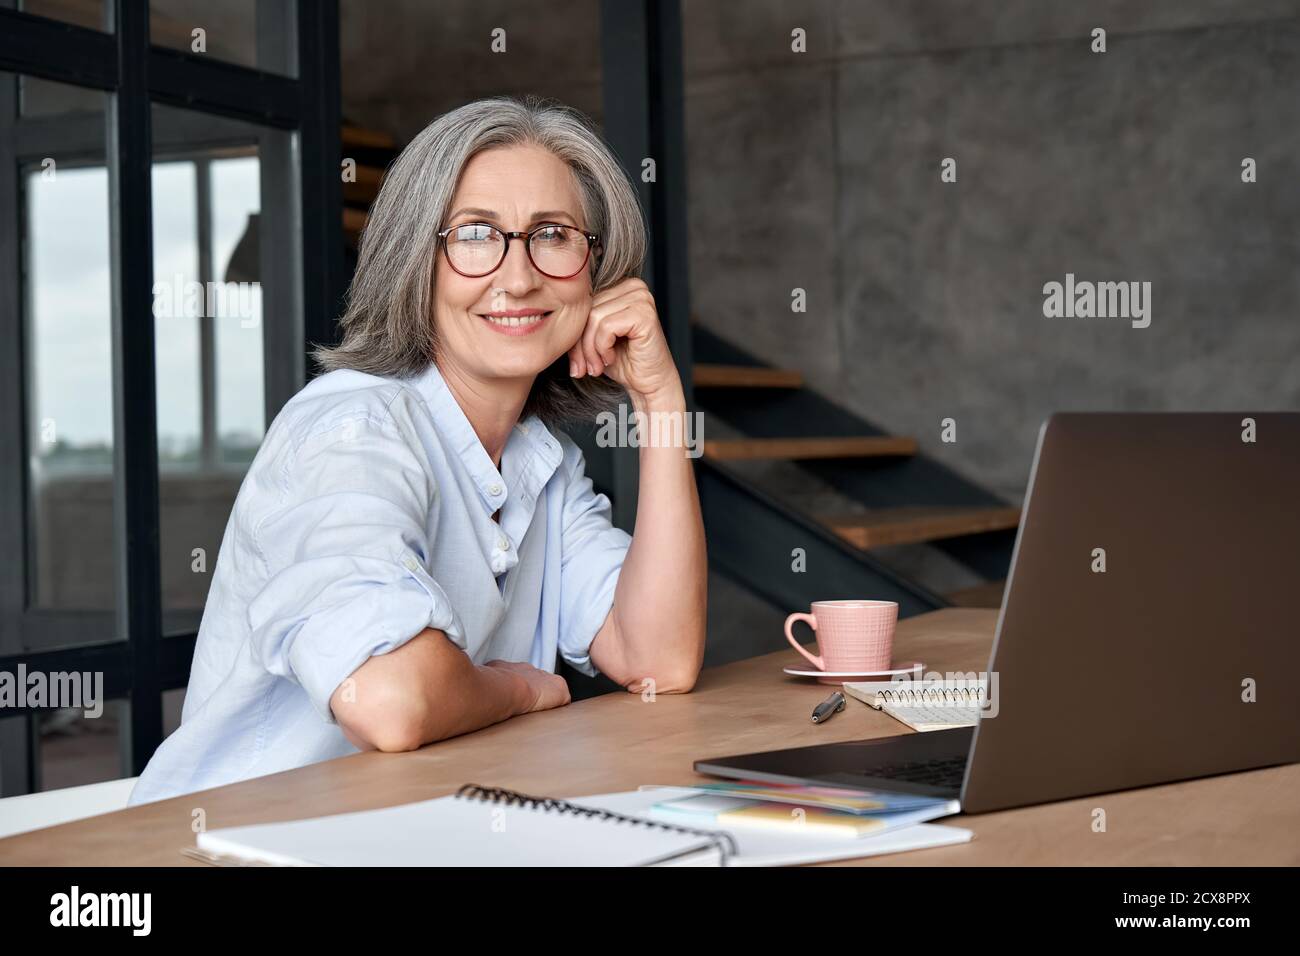 Smiling mature middle aged woman sitting at workplace with laptop, portrait. Stock Photo